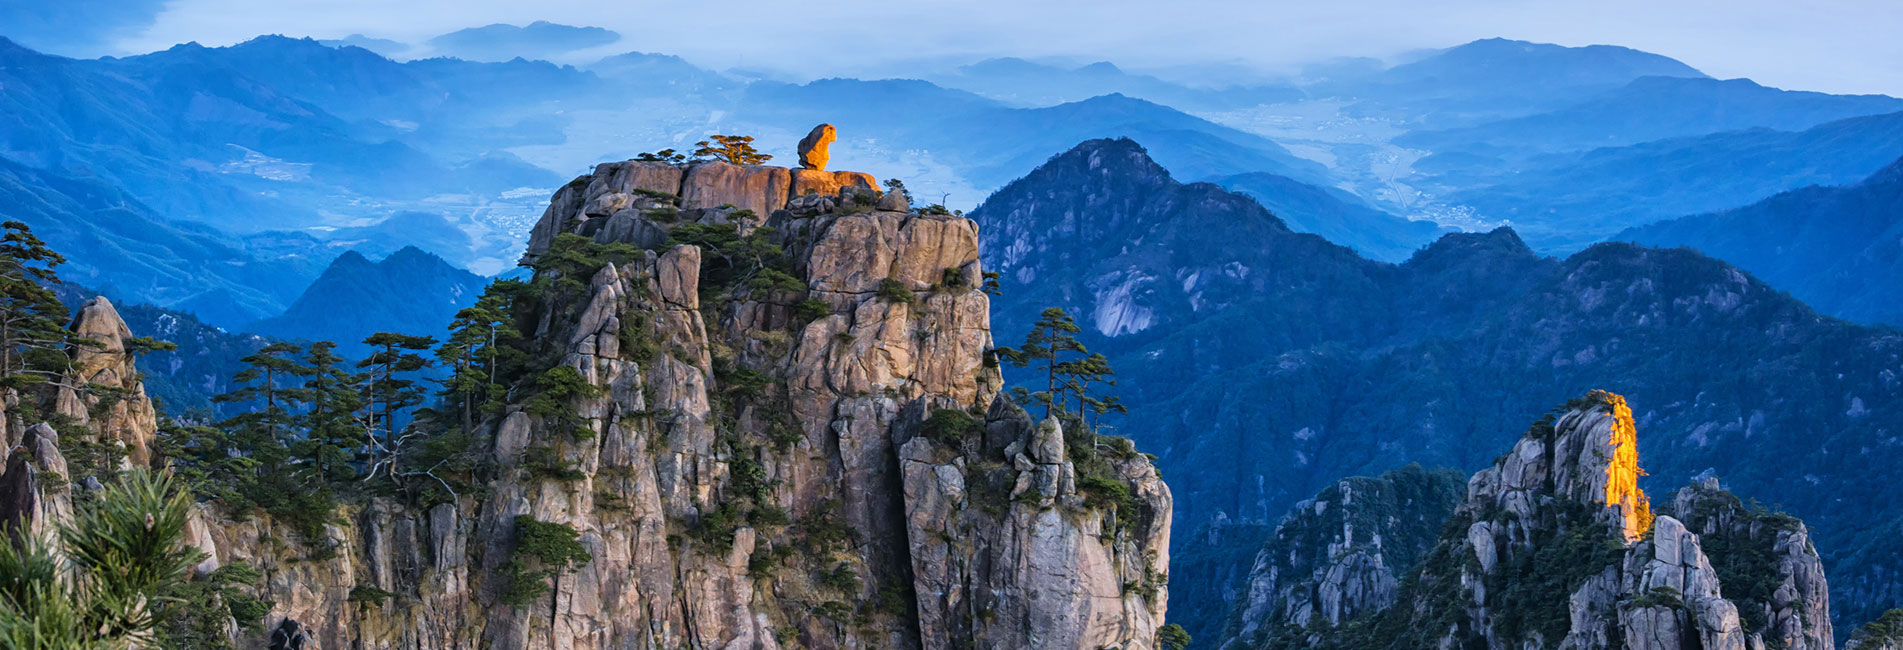 huangshan tours from singapore